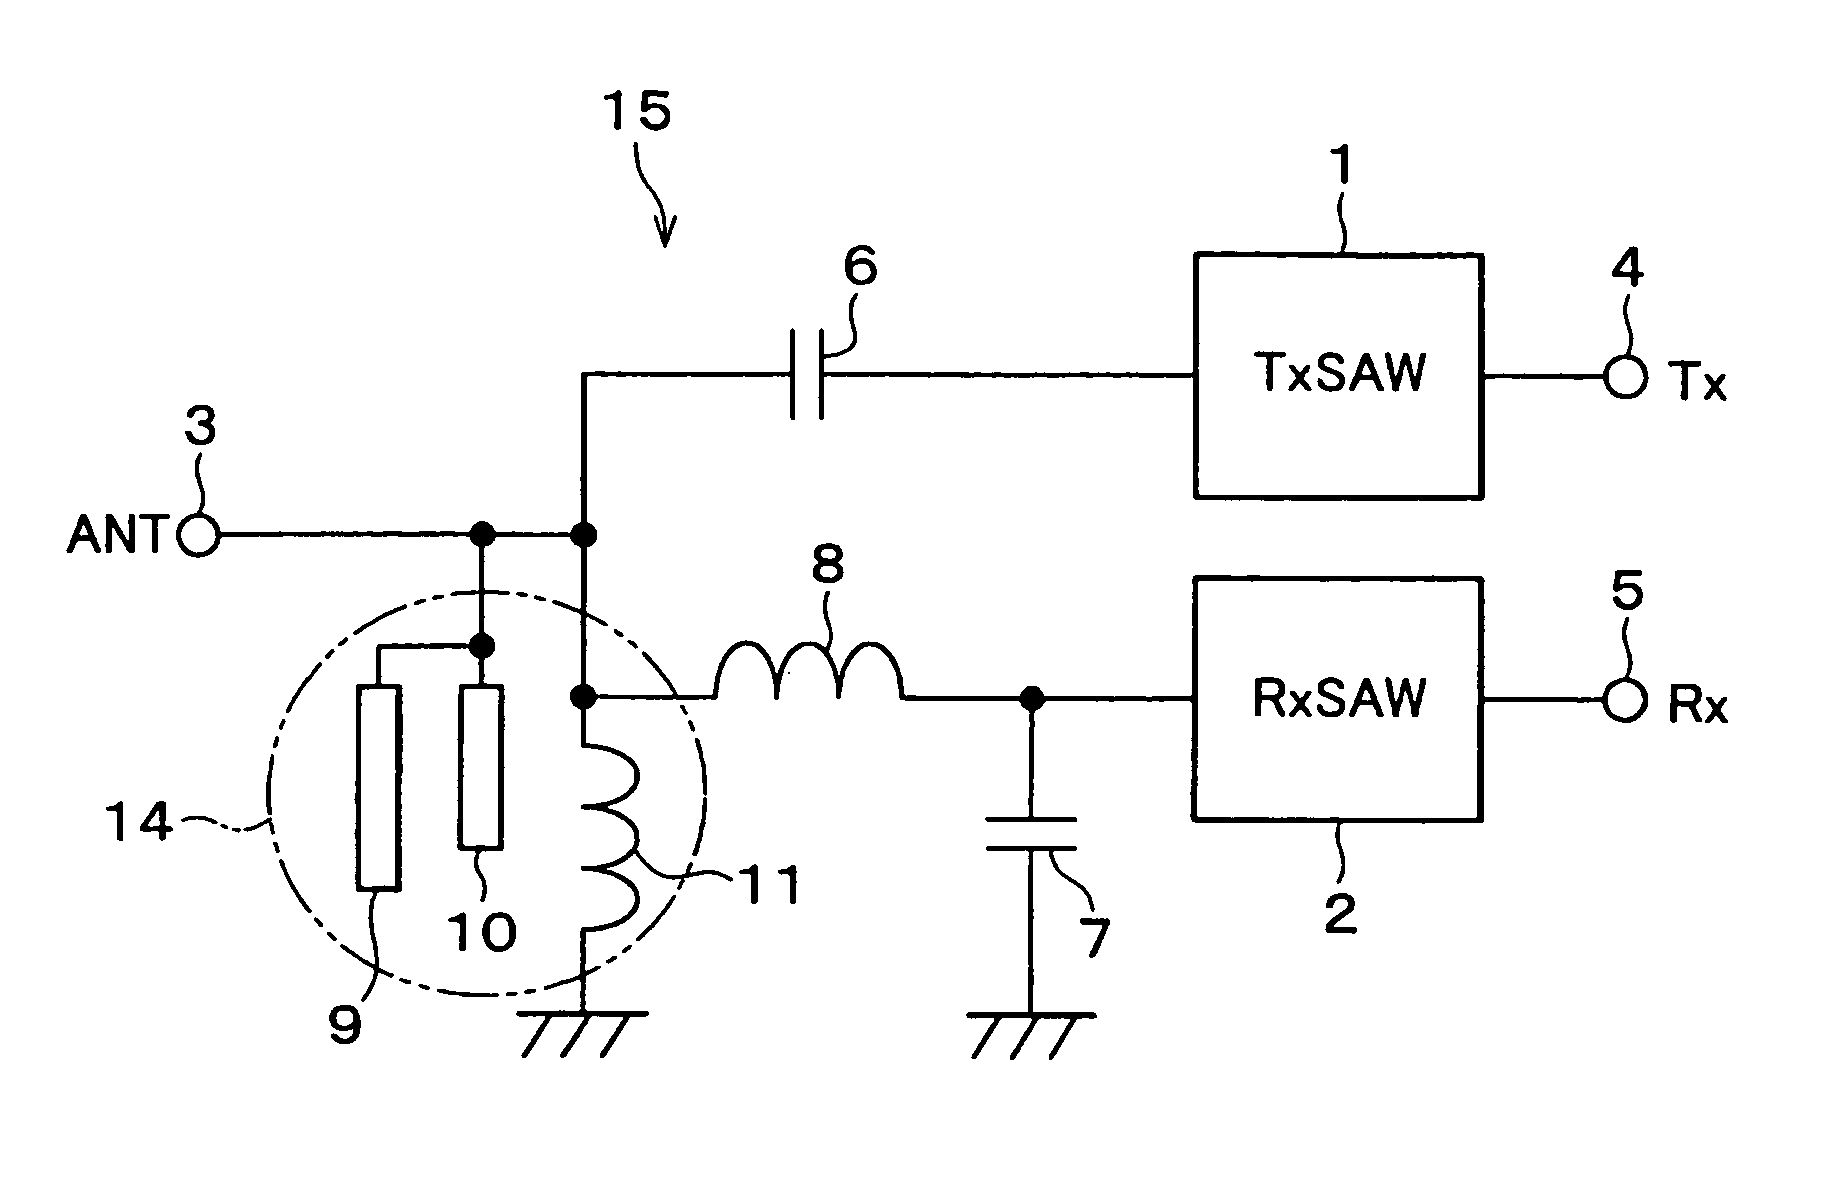 Duplexer and communication apparatus with a matching circuit including a trap circuit for harmonic suppression